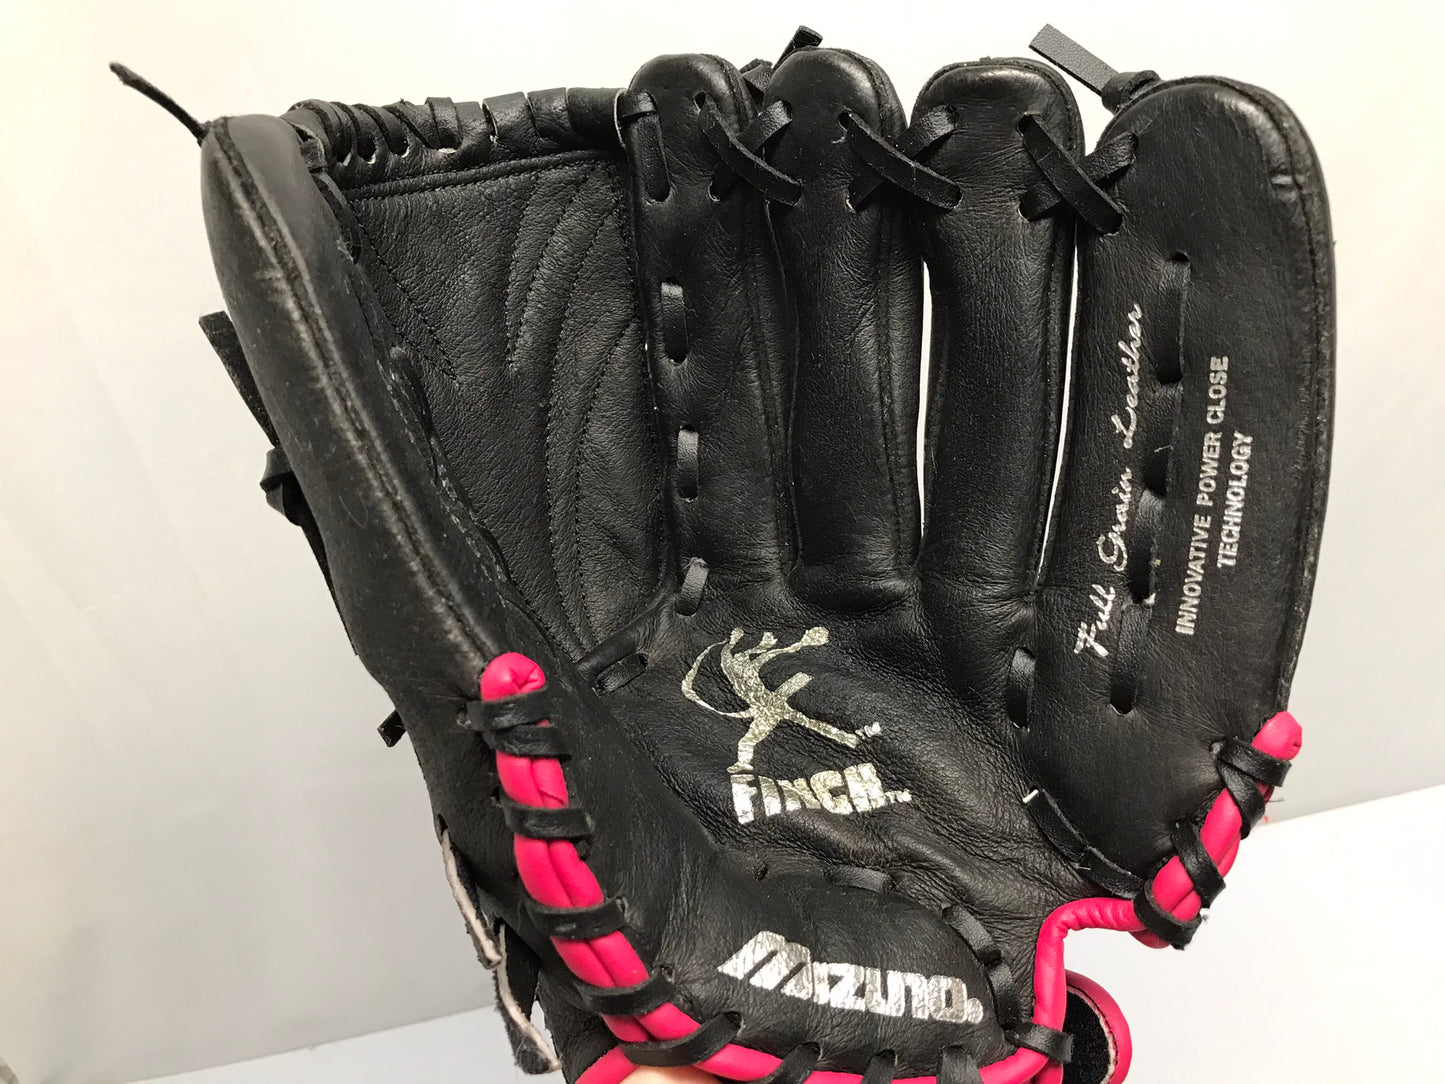 Baseball Glove Child Youth Size 11.5 Mizuno Black Pink Leather Fits On Left Hand Excellent